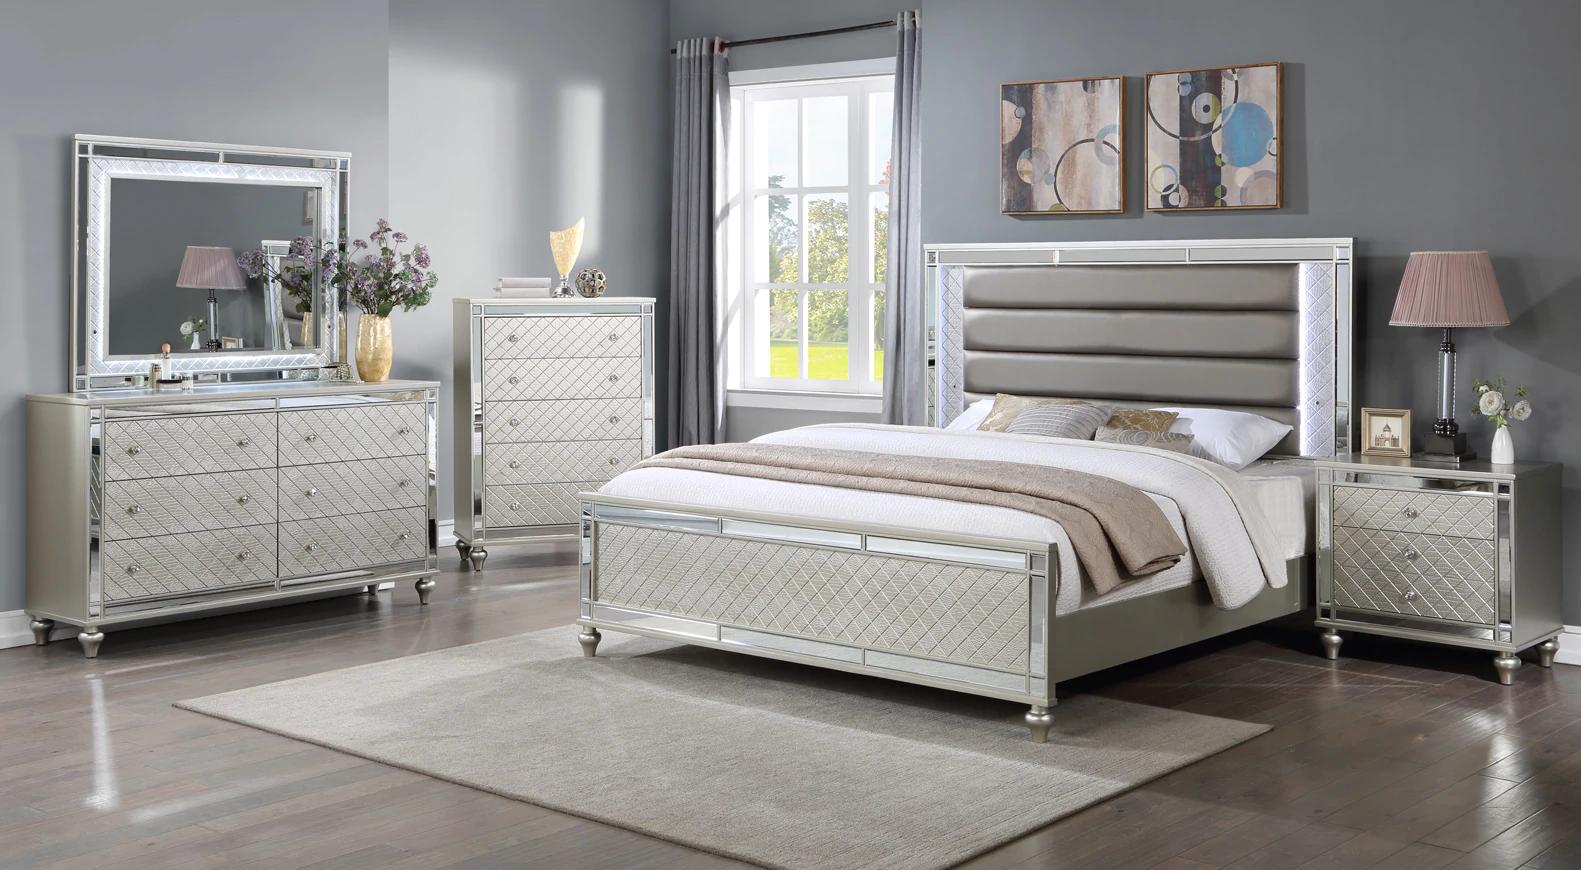 Modern Panel Bedroom Set Cristian B1680-Q-Bed-5pcs in White, Champagne Crocodile Texture